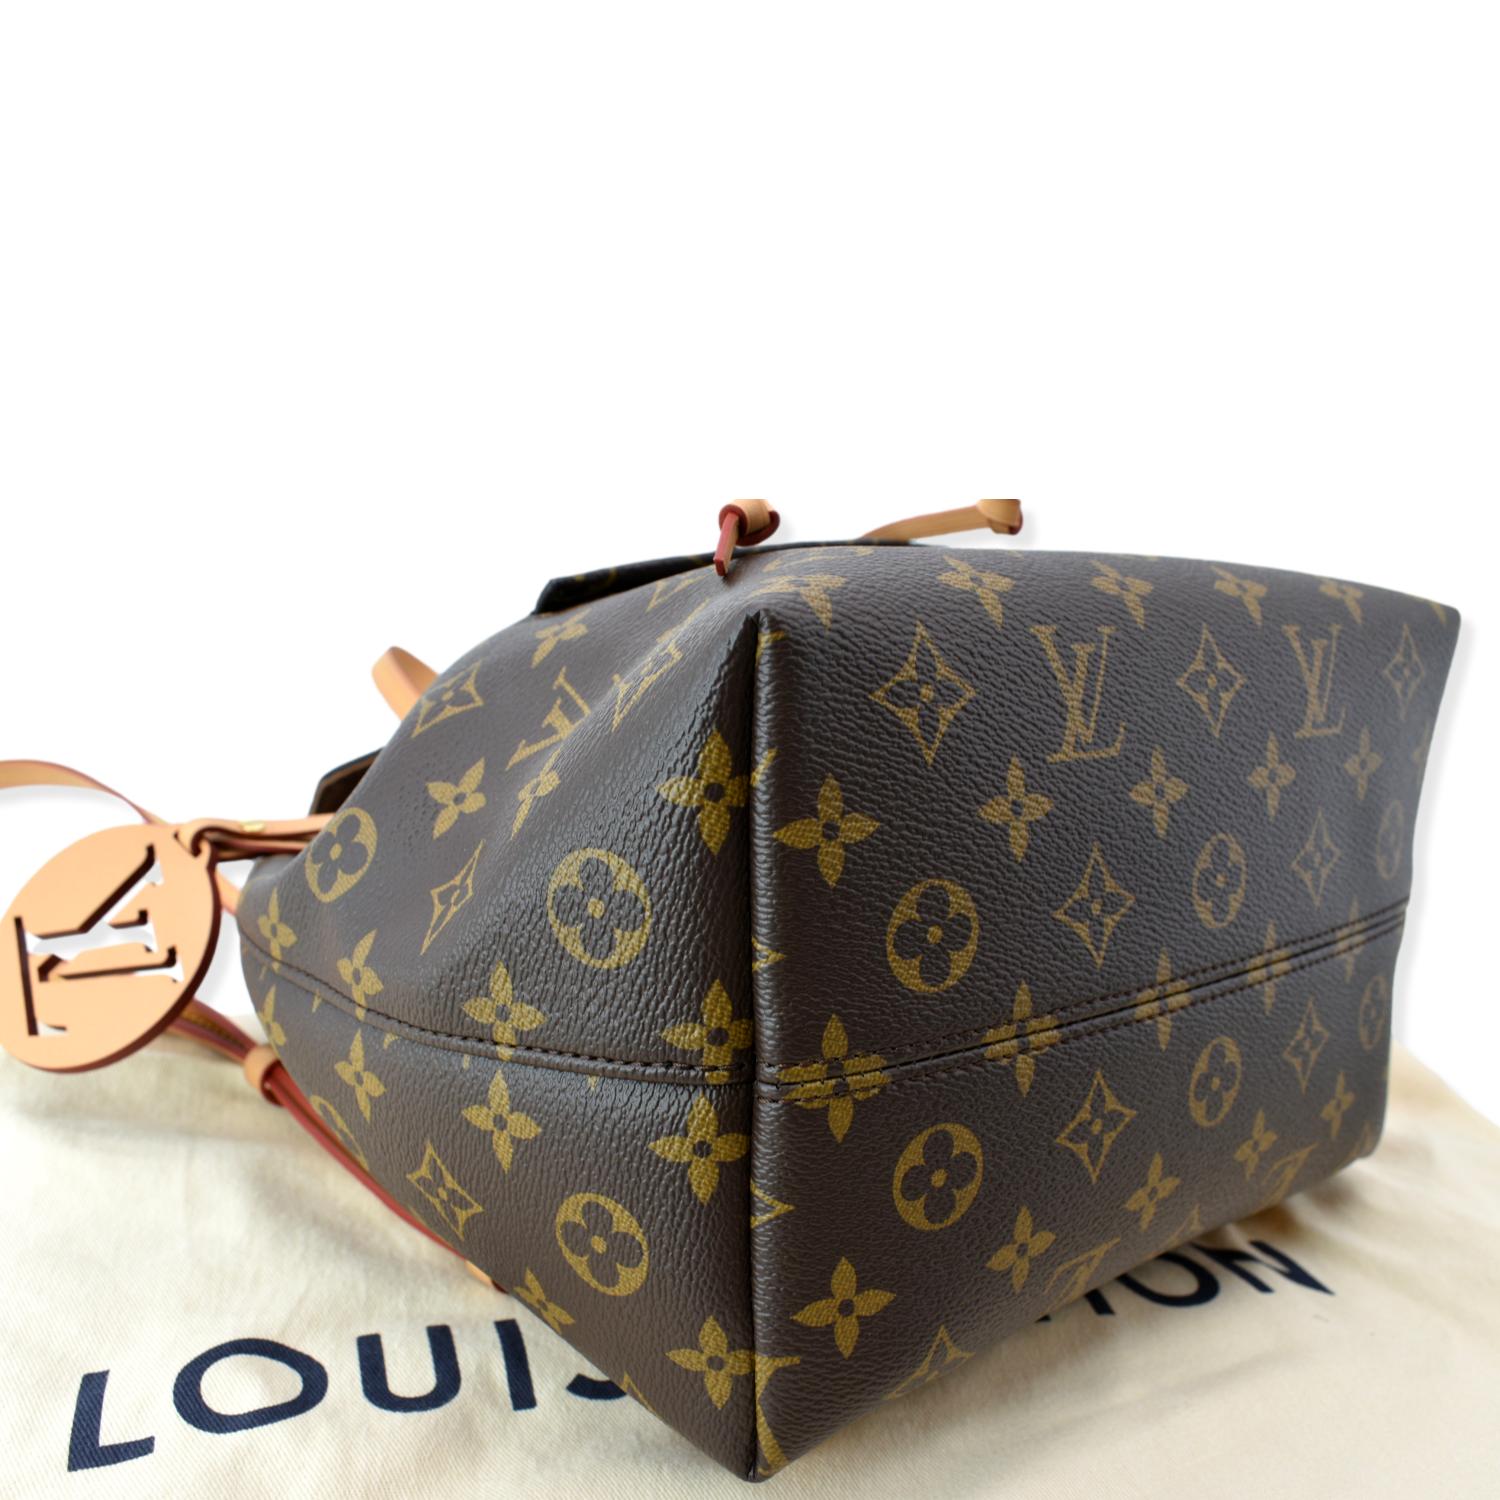 Louis Vuitton Vintage - Monogram Montsouris PM - Brown - Canvas and  Vachetta Leather Backpack - Luxury High Quality - Avvenice